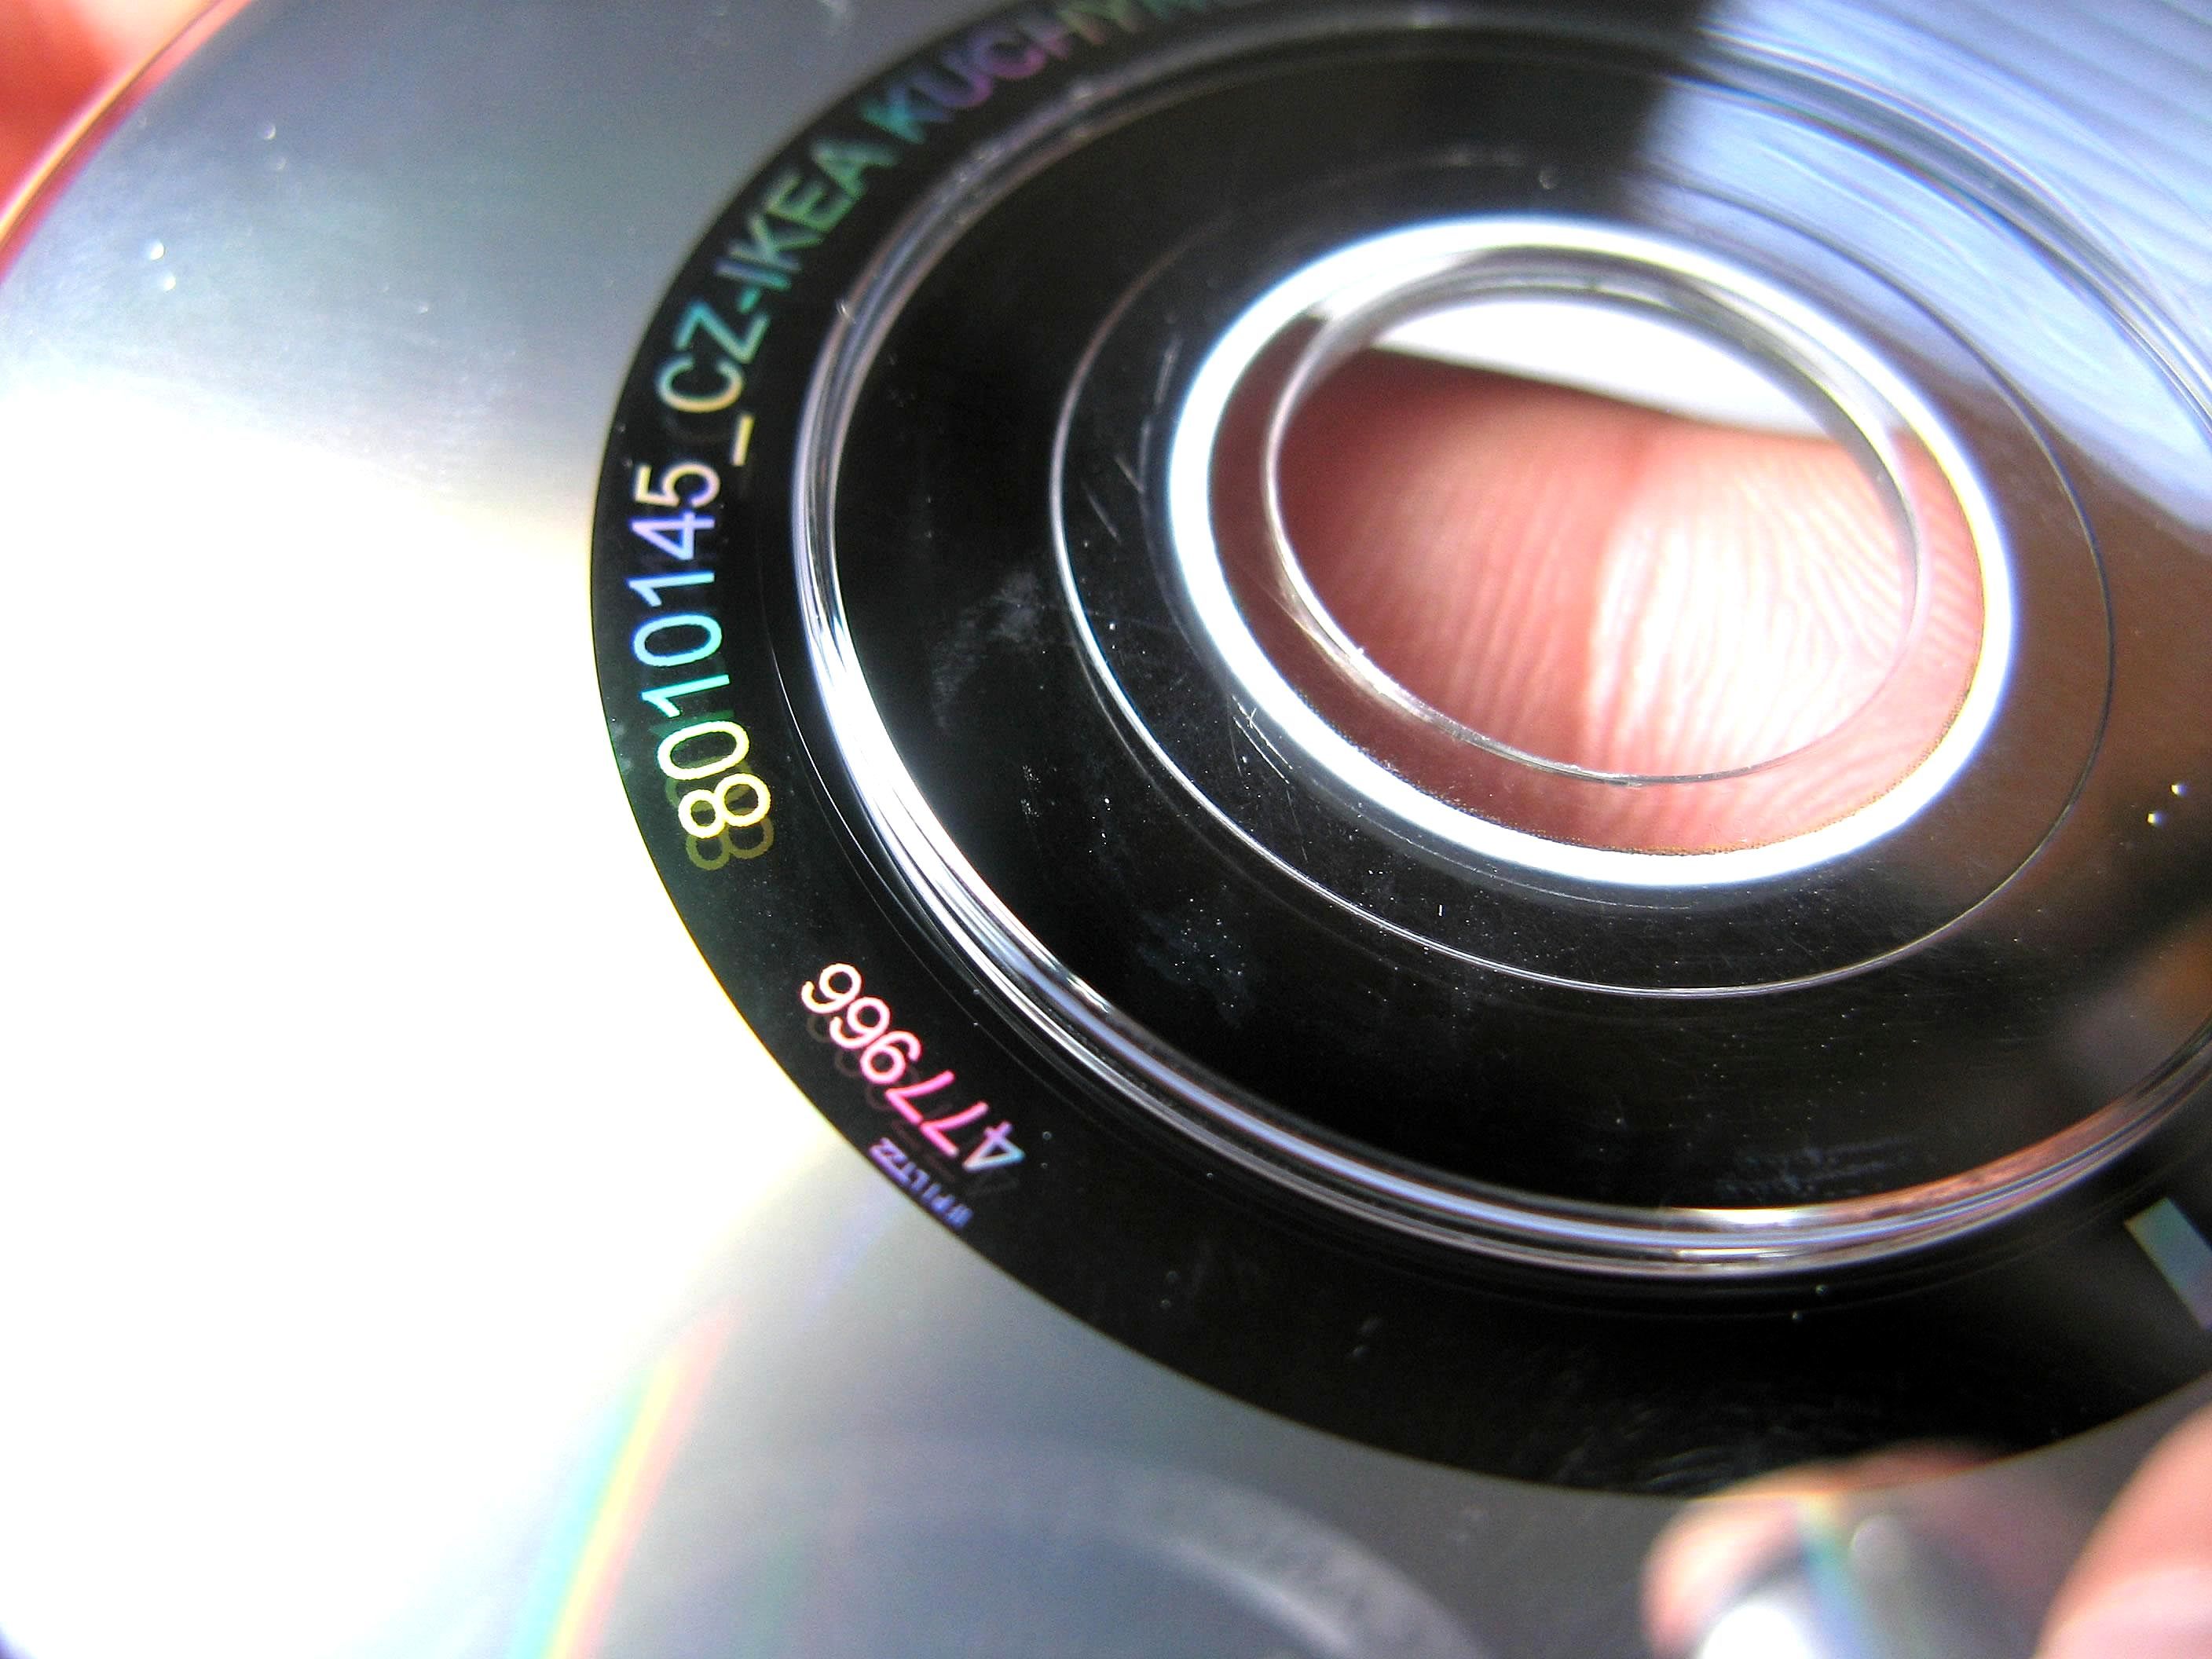 File:Cd dvd disk close up.jpg - Wikimedia Commons